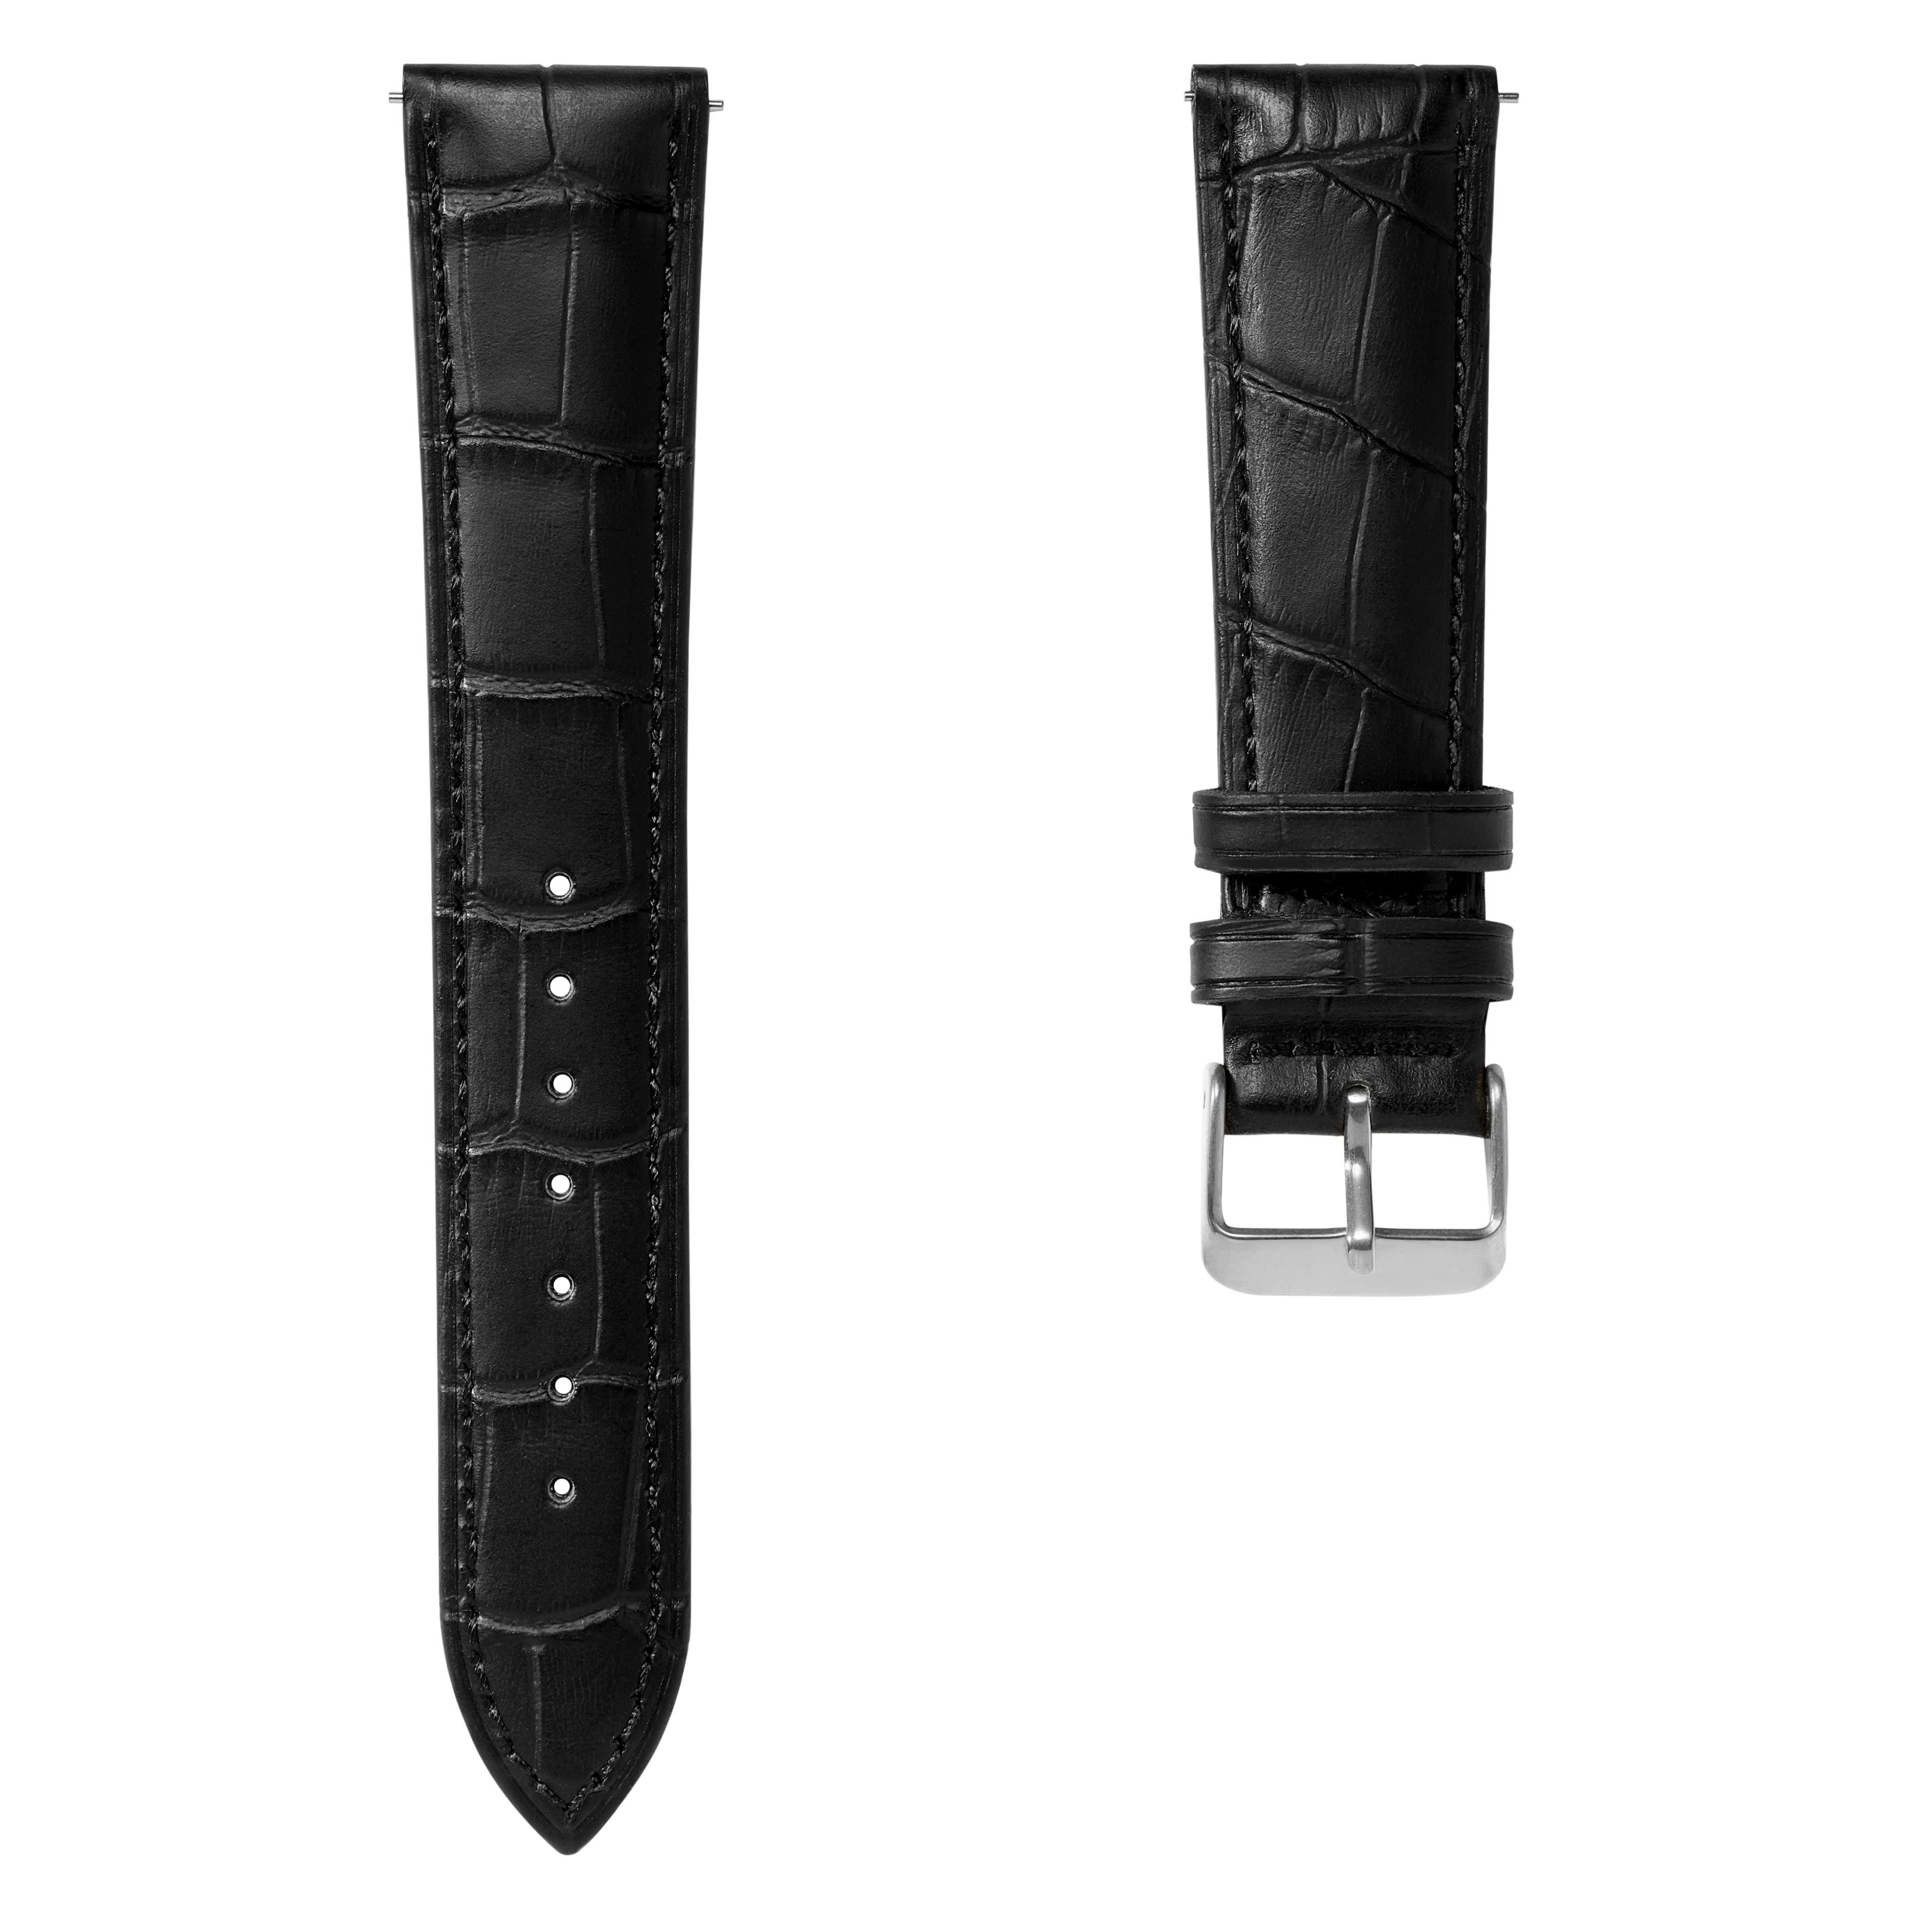 4/5" (20 mm) Crocodile-Embossed Black Leather Watch Strap with Silver-Tone Buckle – Quick Release